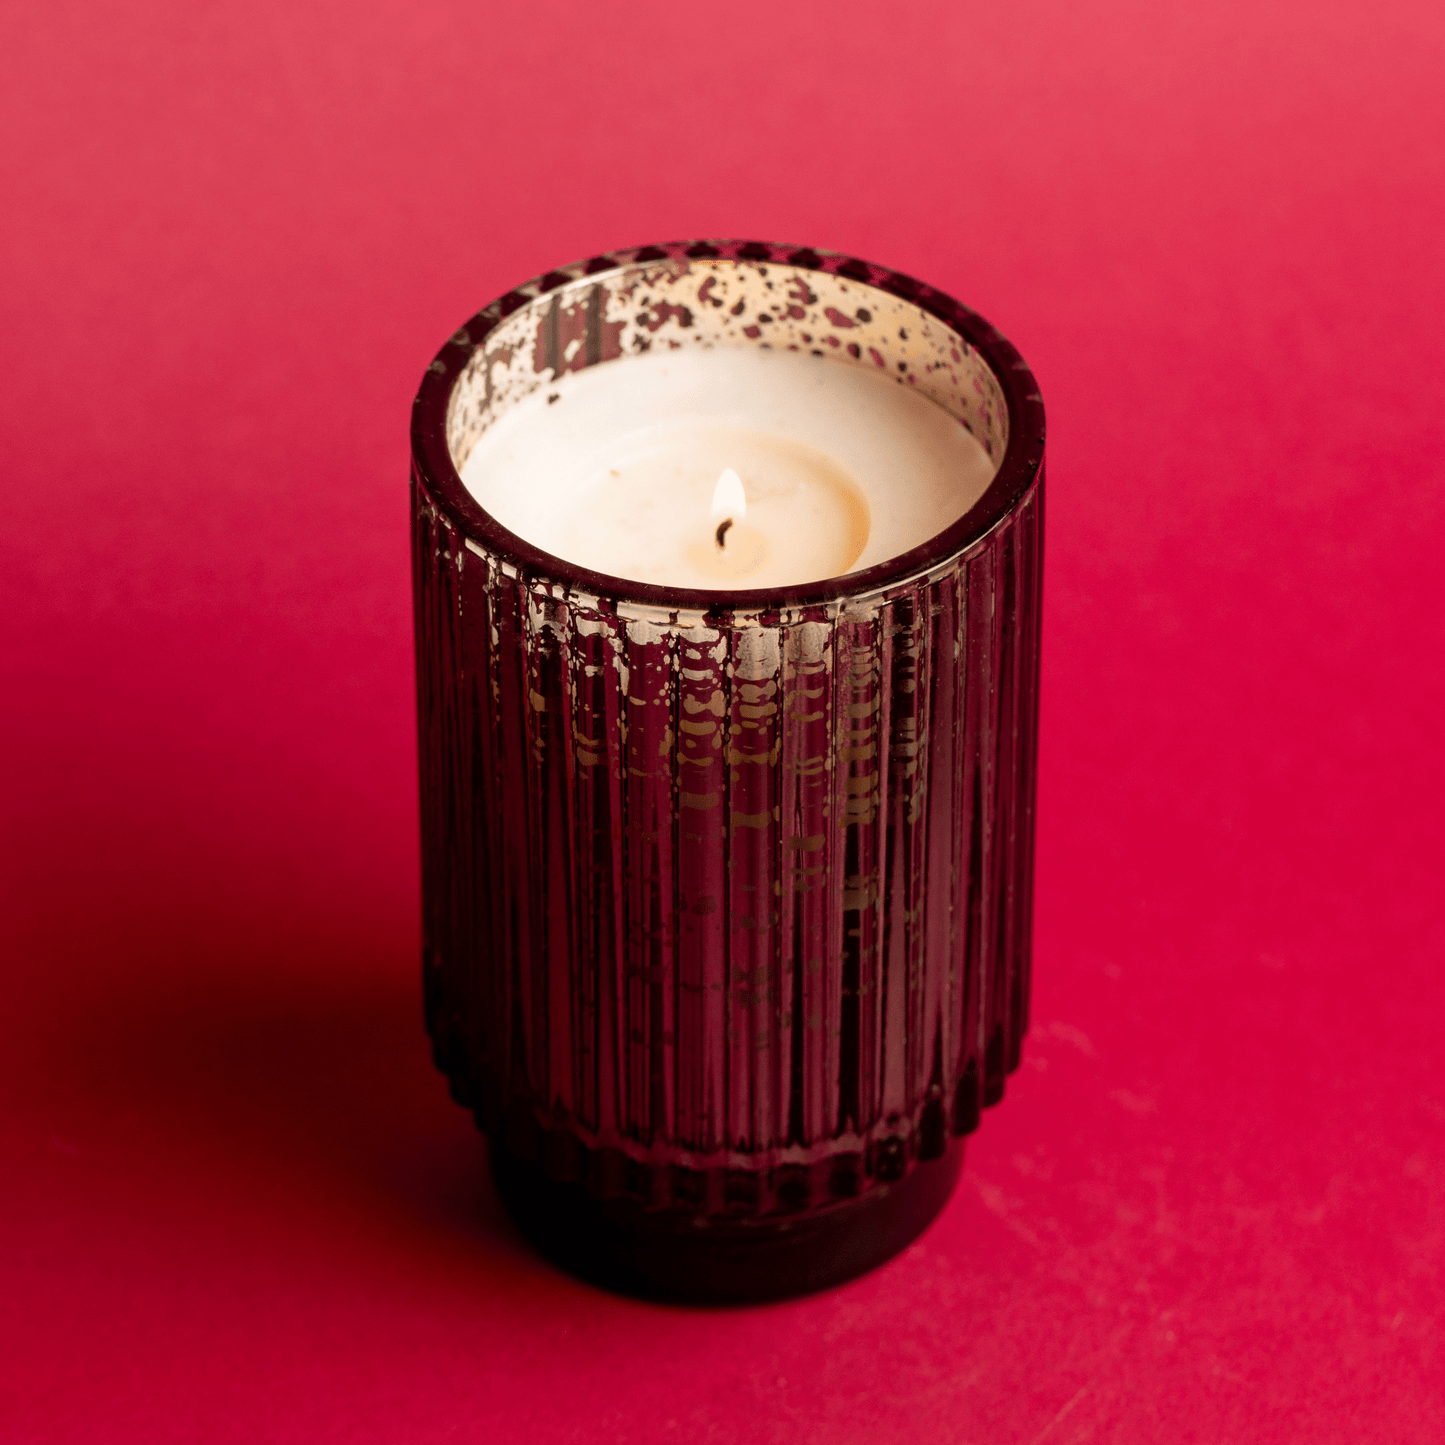 A lit 12 oz. tall mercury glass vessel on red background